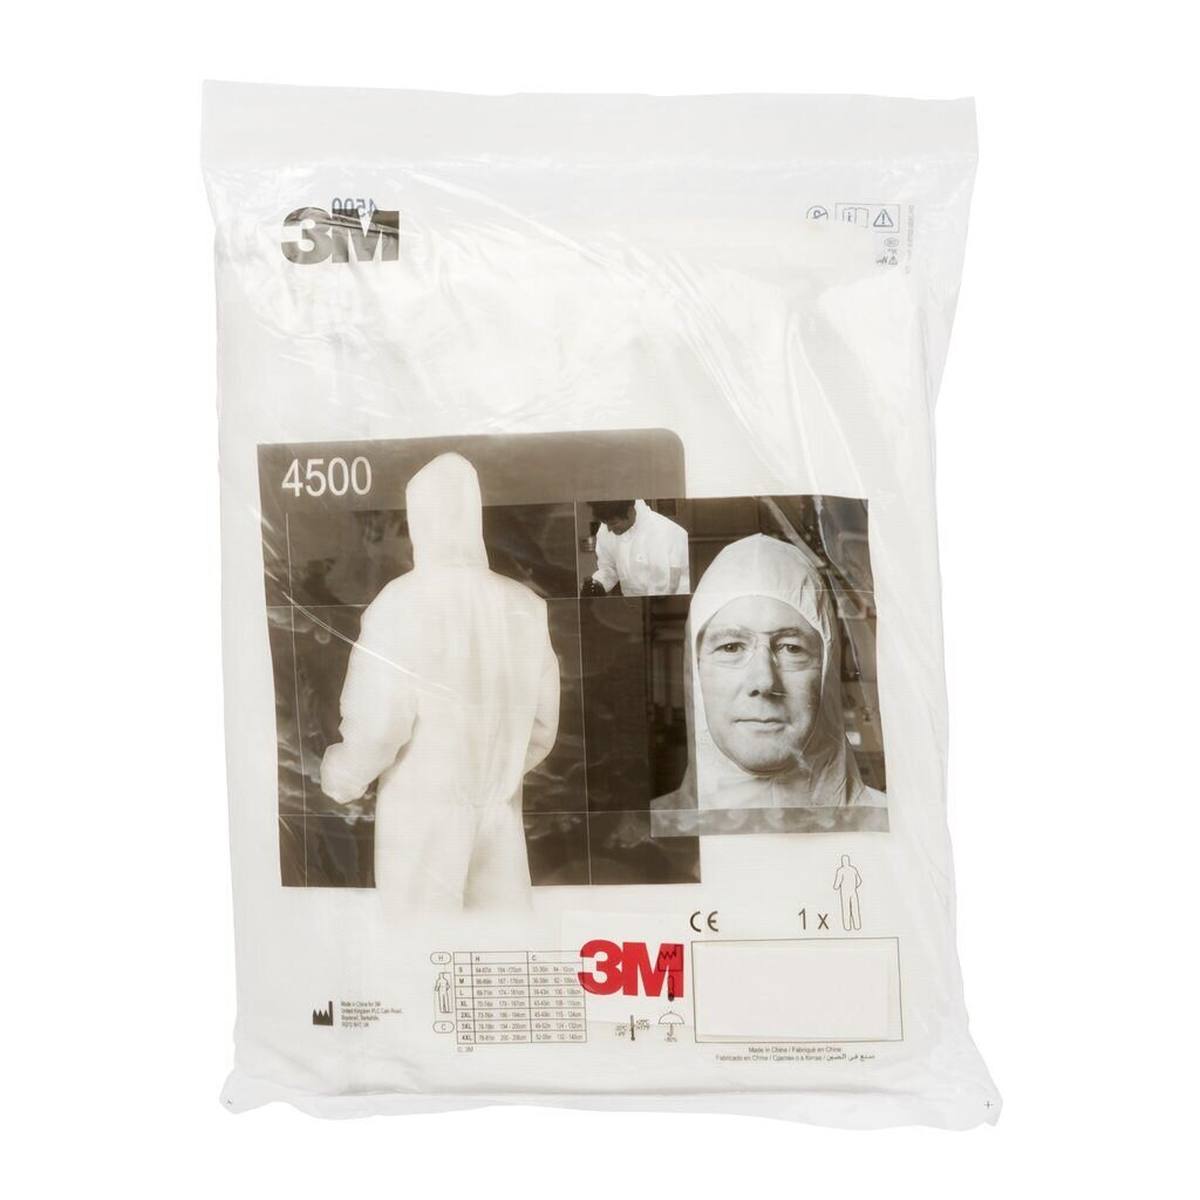 3M 4500 W coverall, white, CE, size 2XL, material polypropylene, elastic band finish